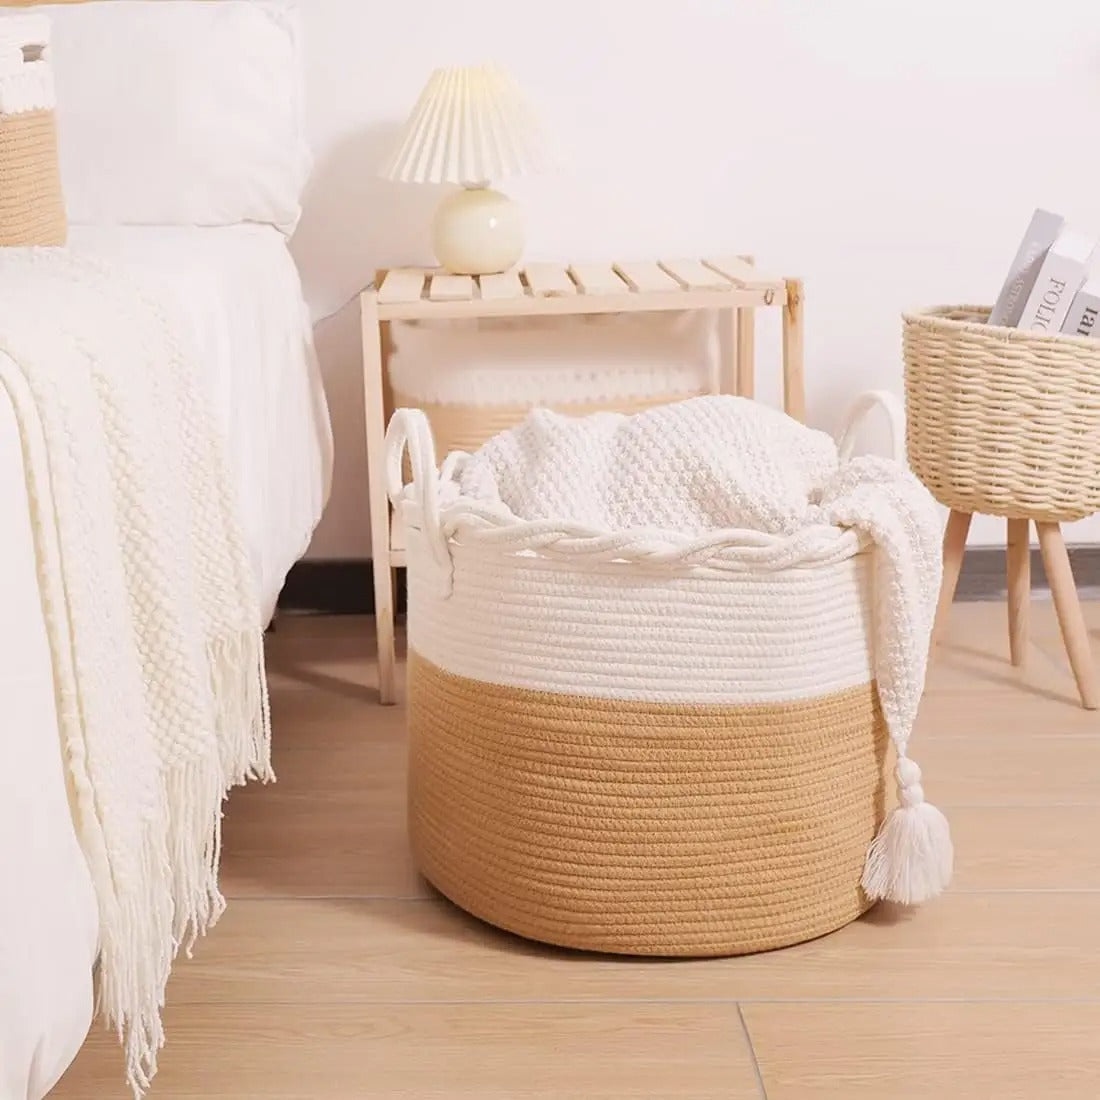 Woven Storage Baskets Laundry bags